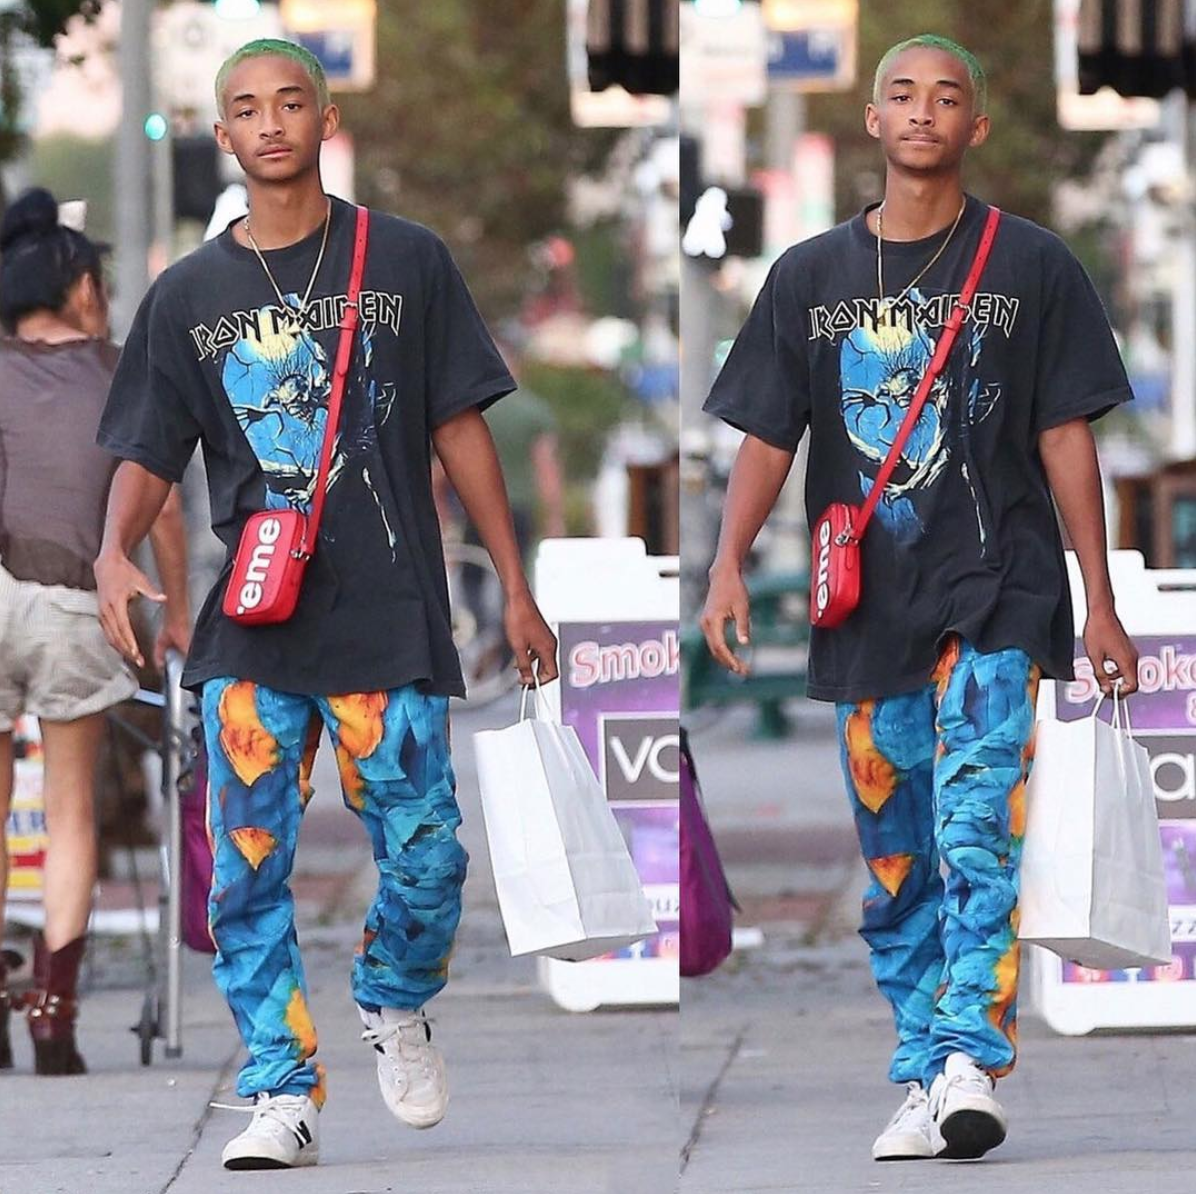 SPOTTED: Jaden Smith In Supreme x Louis Vuitton, G Star Jeans + New Balance Sneakers